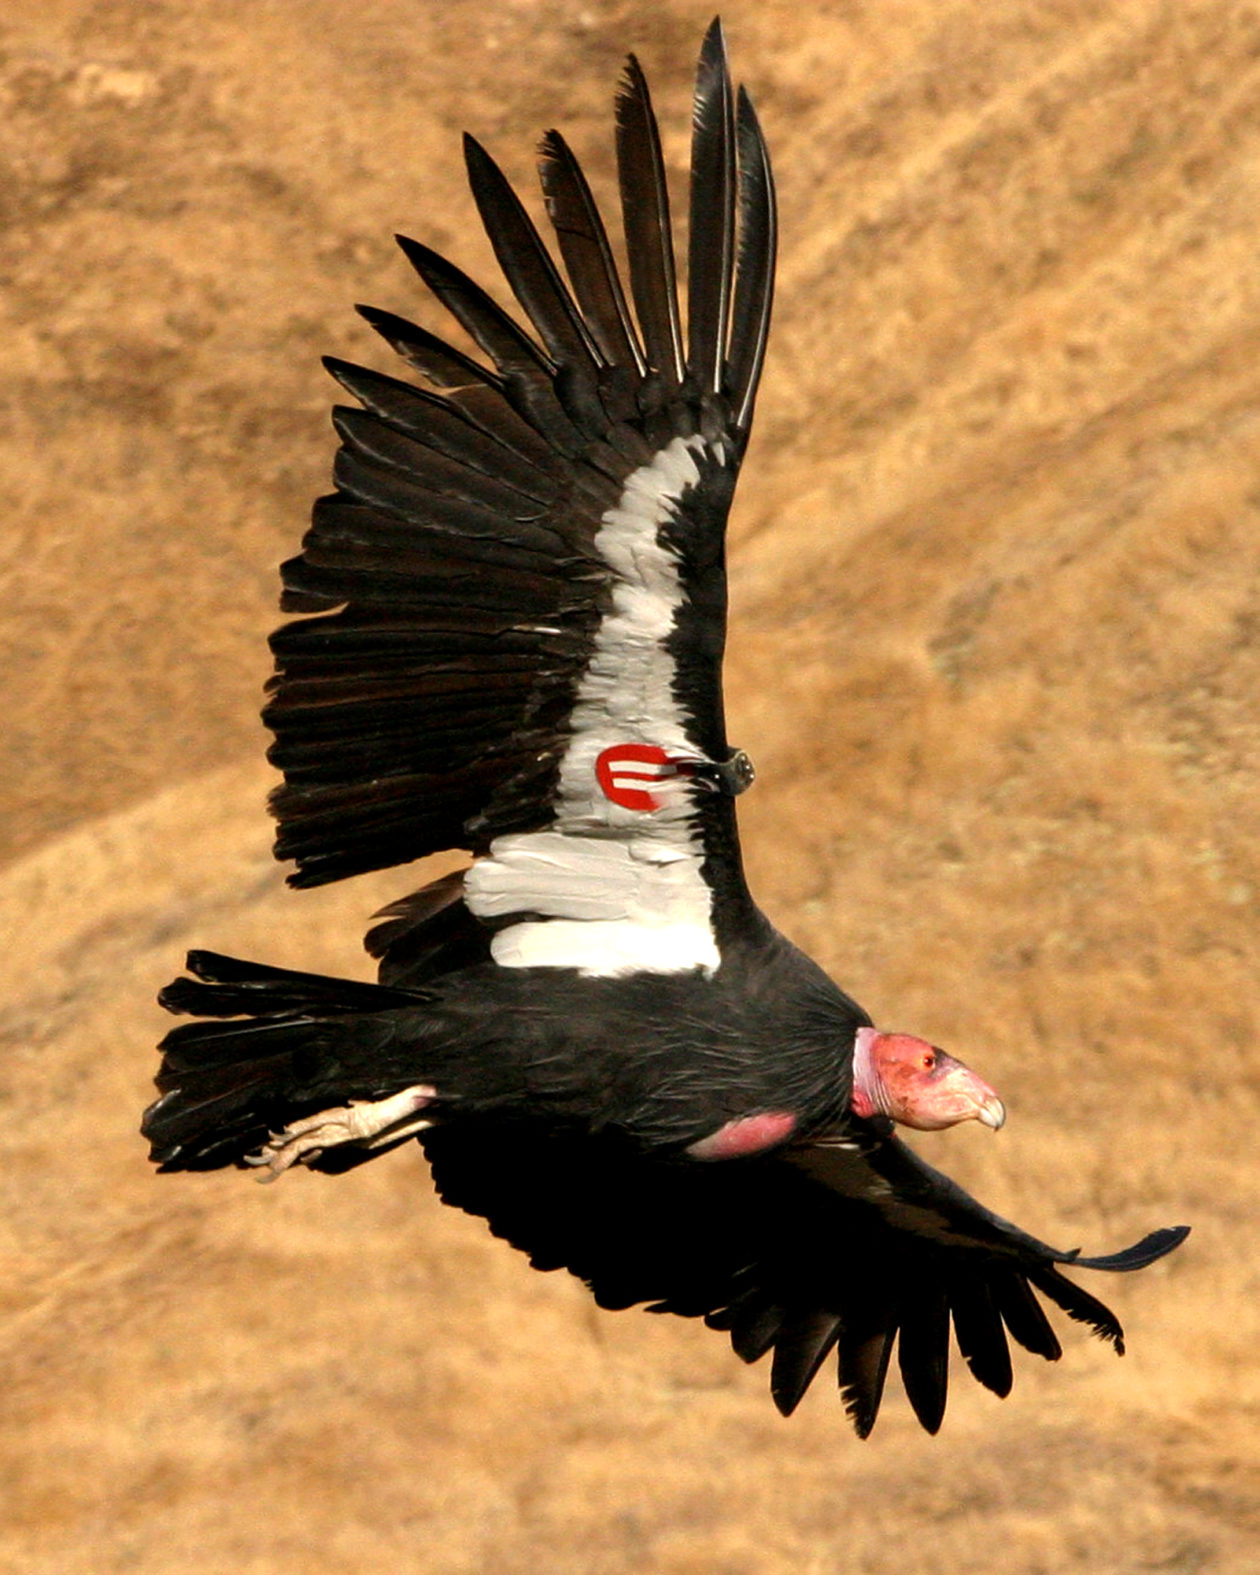 California Condor Population Reaches New Heights in 2015 Yale E360